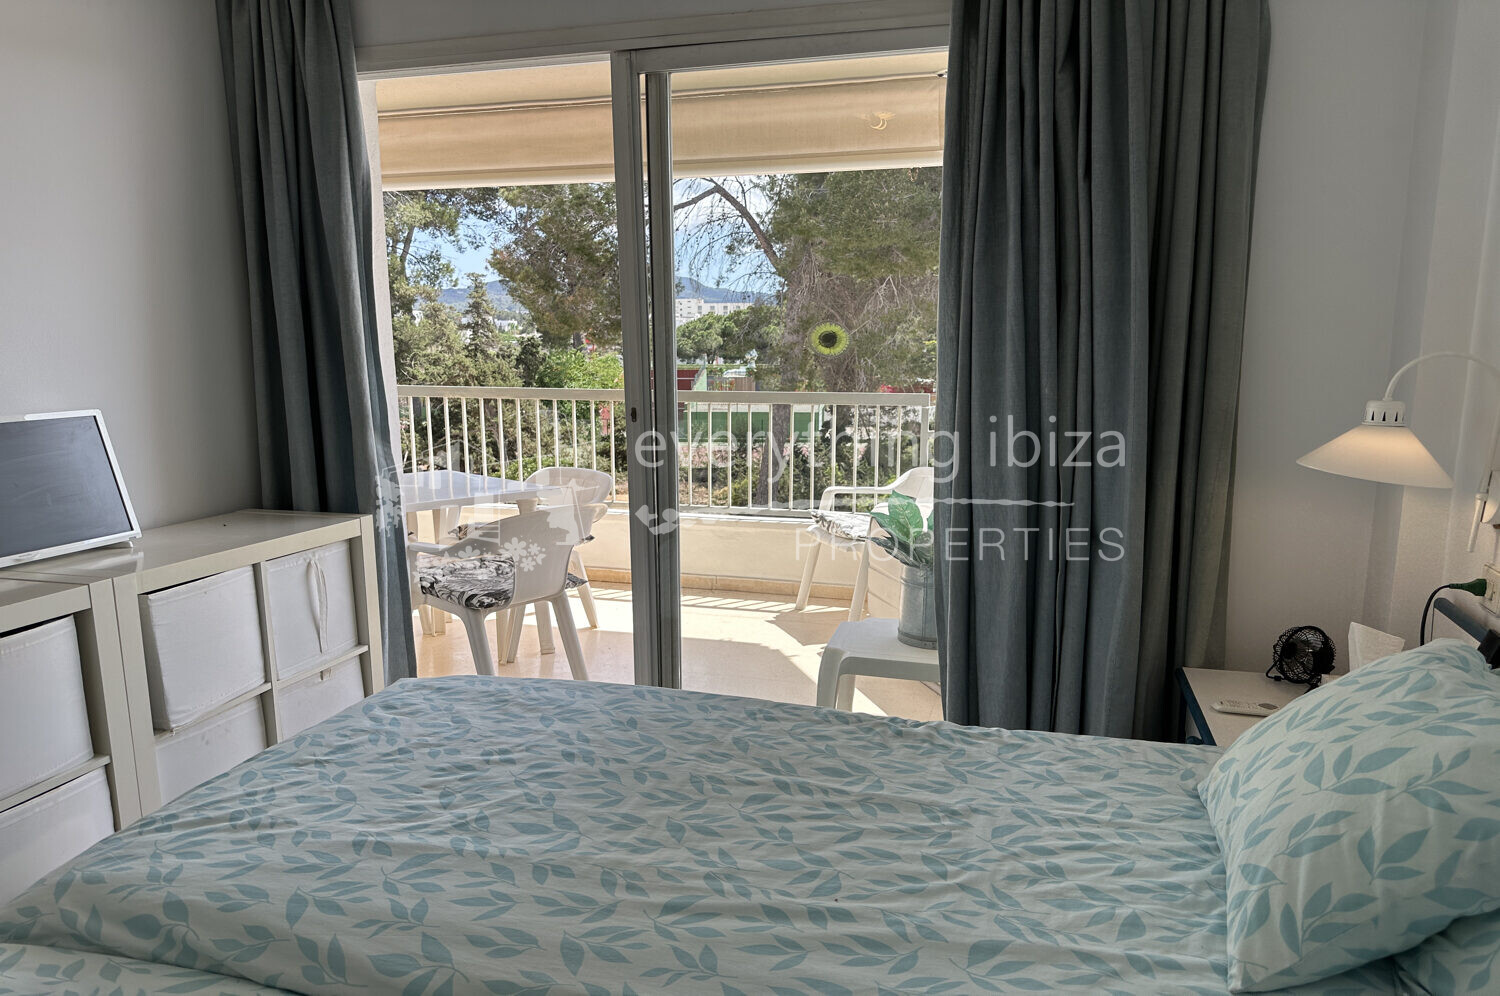 Charming One Bed Apartment Close to the Beach and Bay, ref. 1602, for sale in Ibiza by everything ibiza Properties